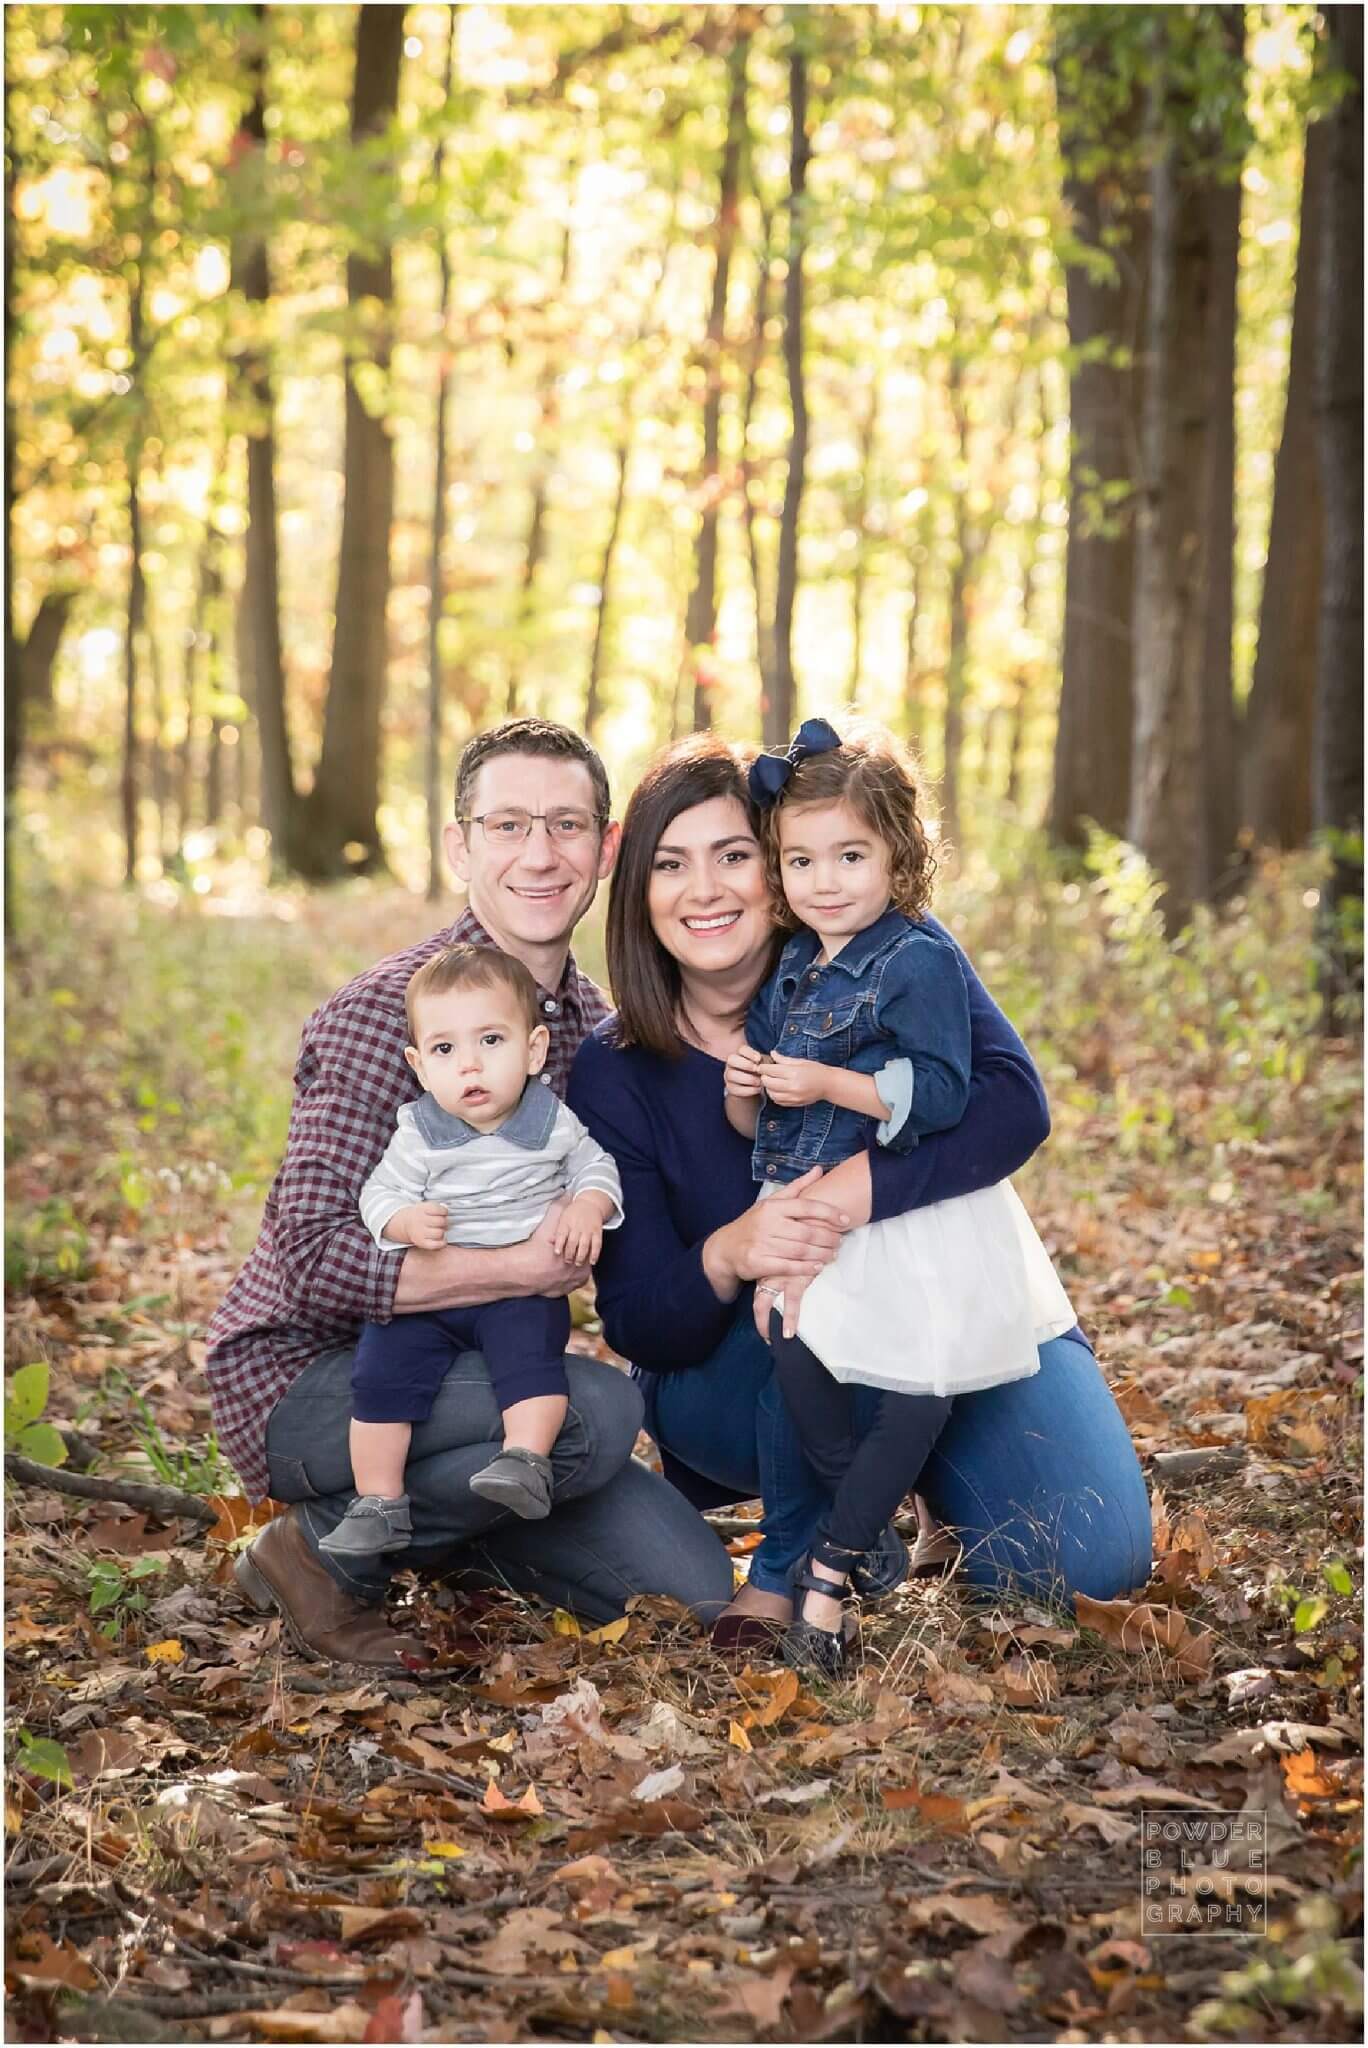 south hills pittsburgh family photographer. fall mini portrait sessions at fairview park in bridgeville, pa. family of four on fall colors with leaves and sunlight.